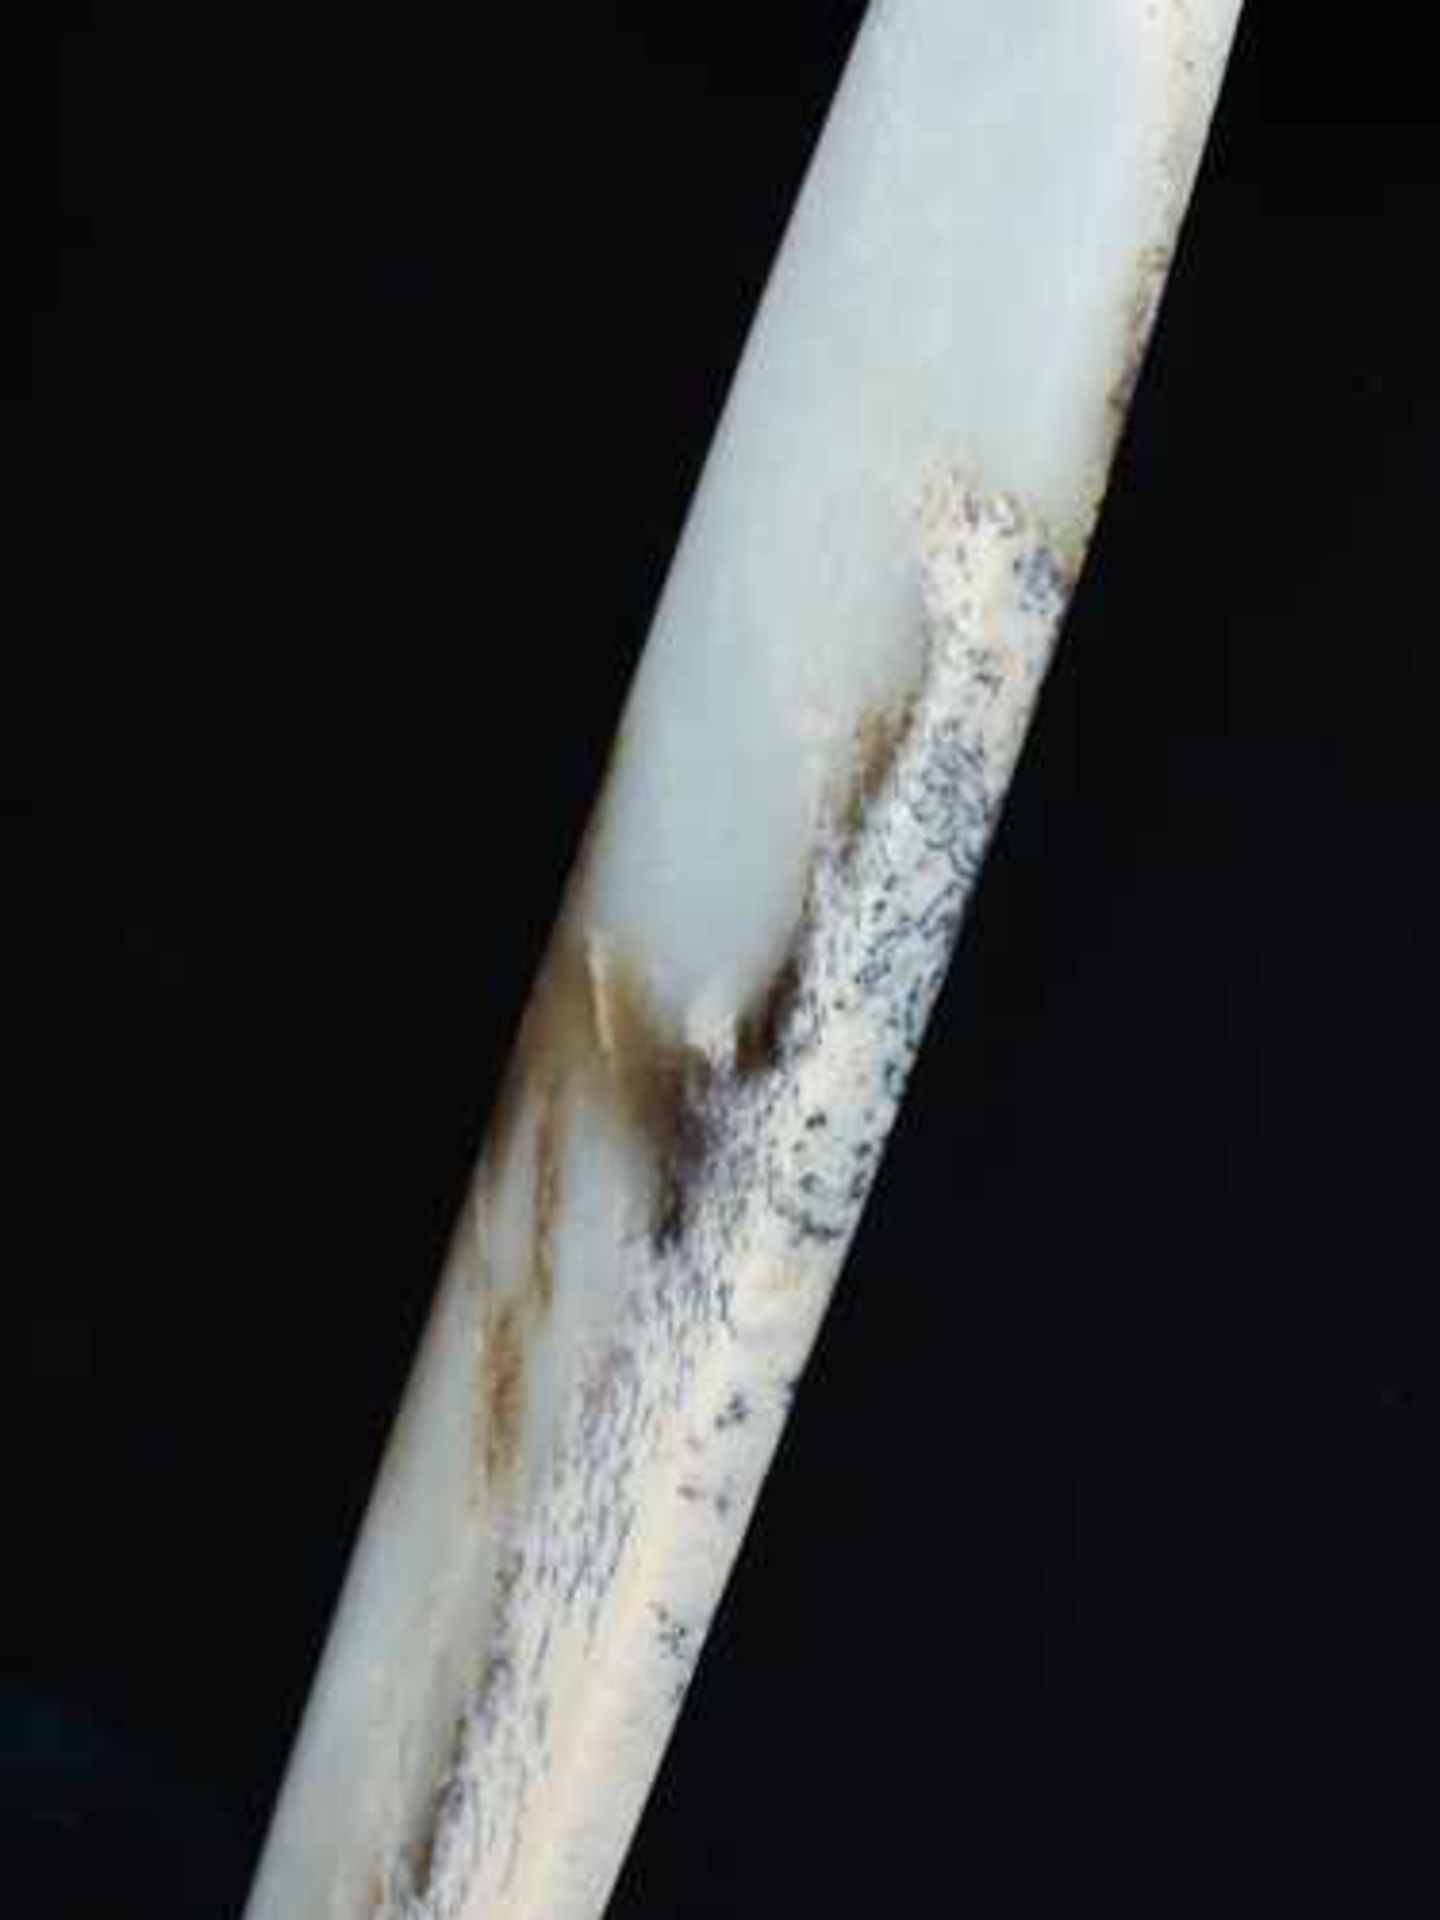 A STRIKING MARBLE-LIKE BEN BLADE IN WHITE JADE Jade, China. Early Bronze Age, Qijia Culture, c. - Image 6 of 7